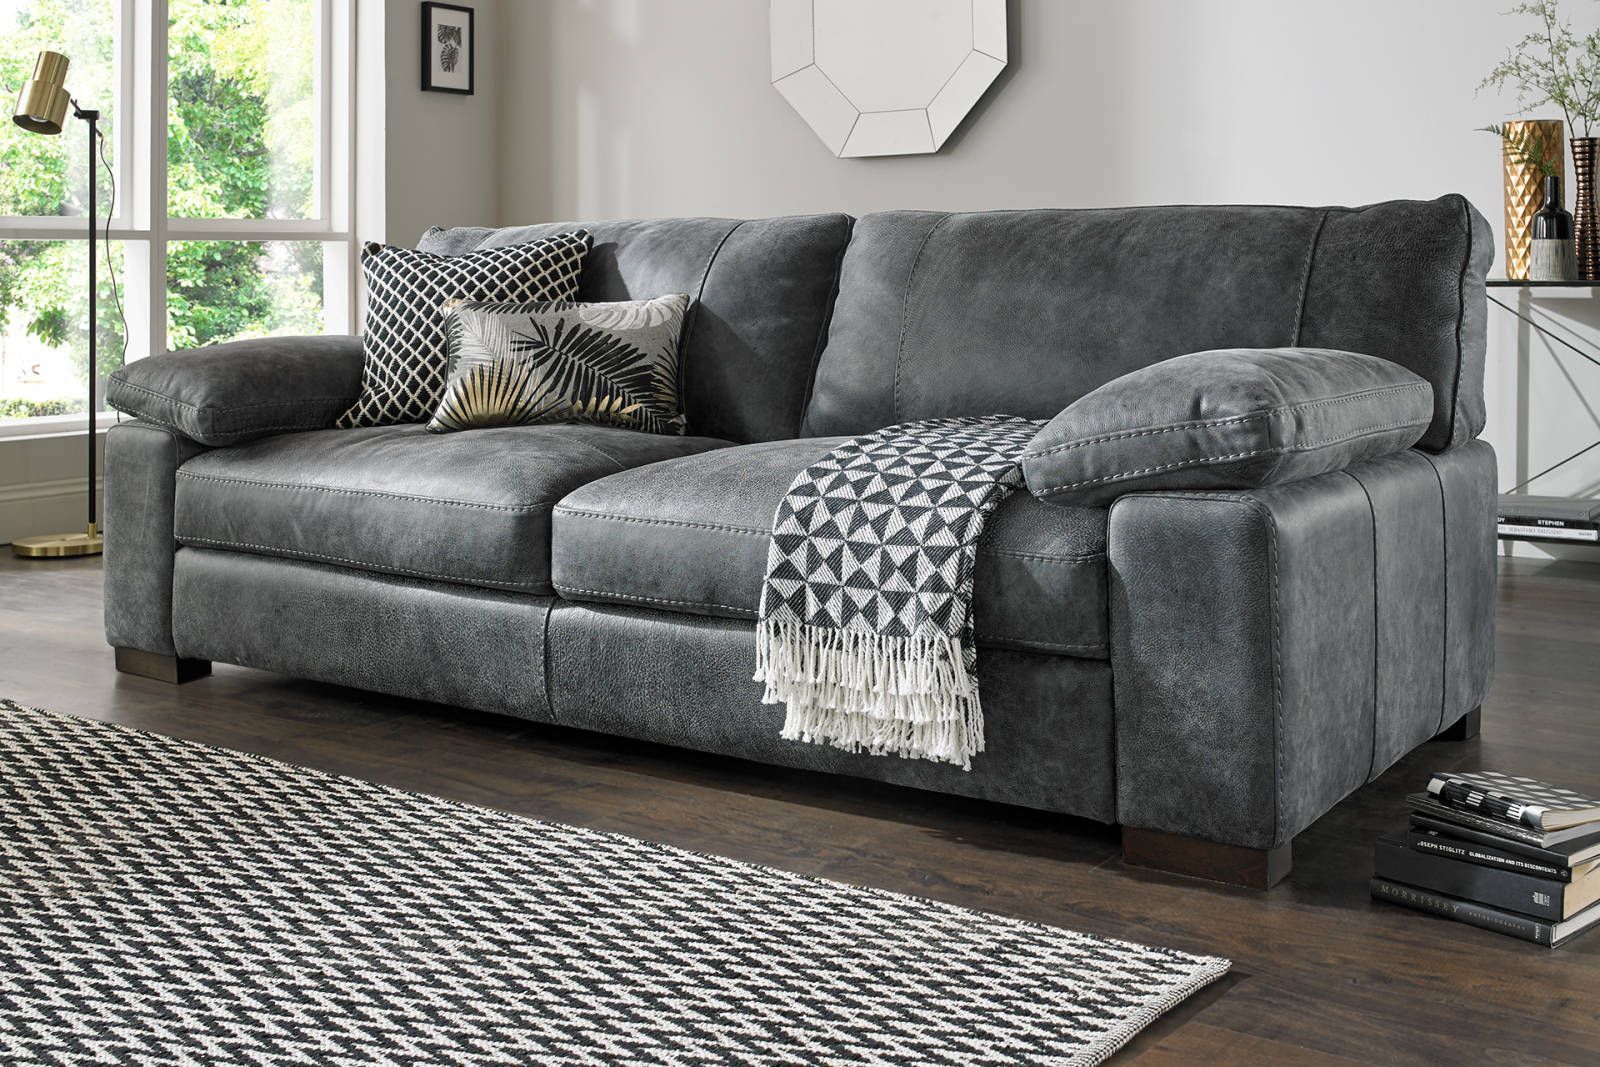 Linara | Sofology | Grey Leather Sofa Living Room, Grey Sofa Living Within Sofas In Dark Grey (View 15 of 20)